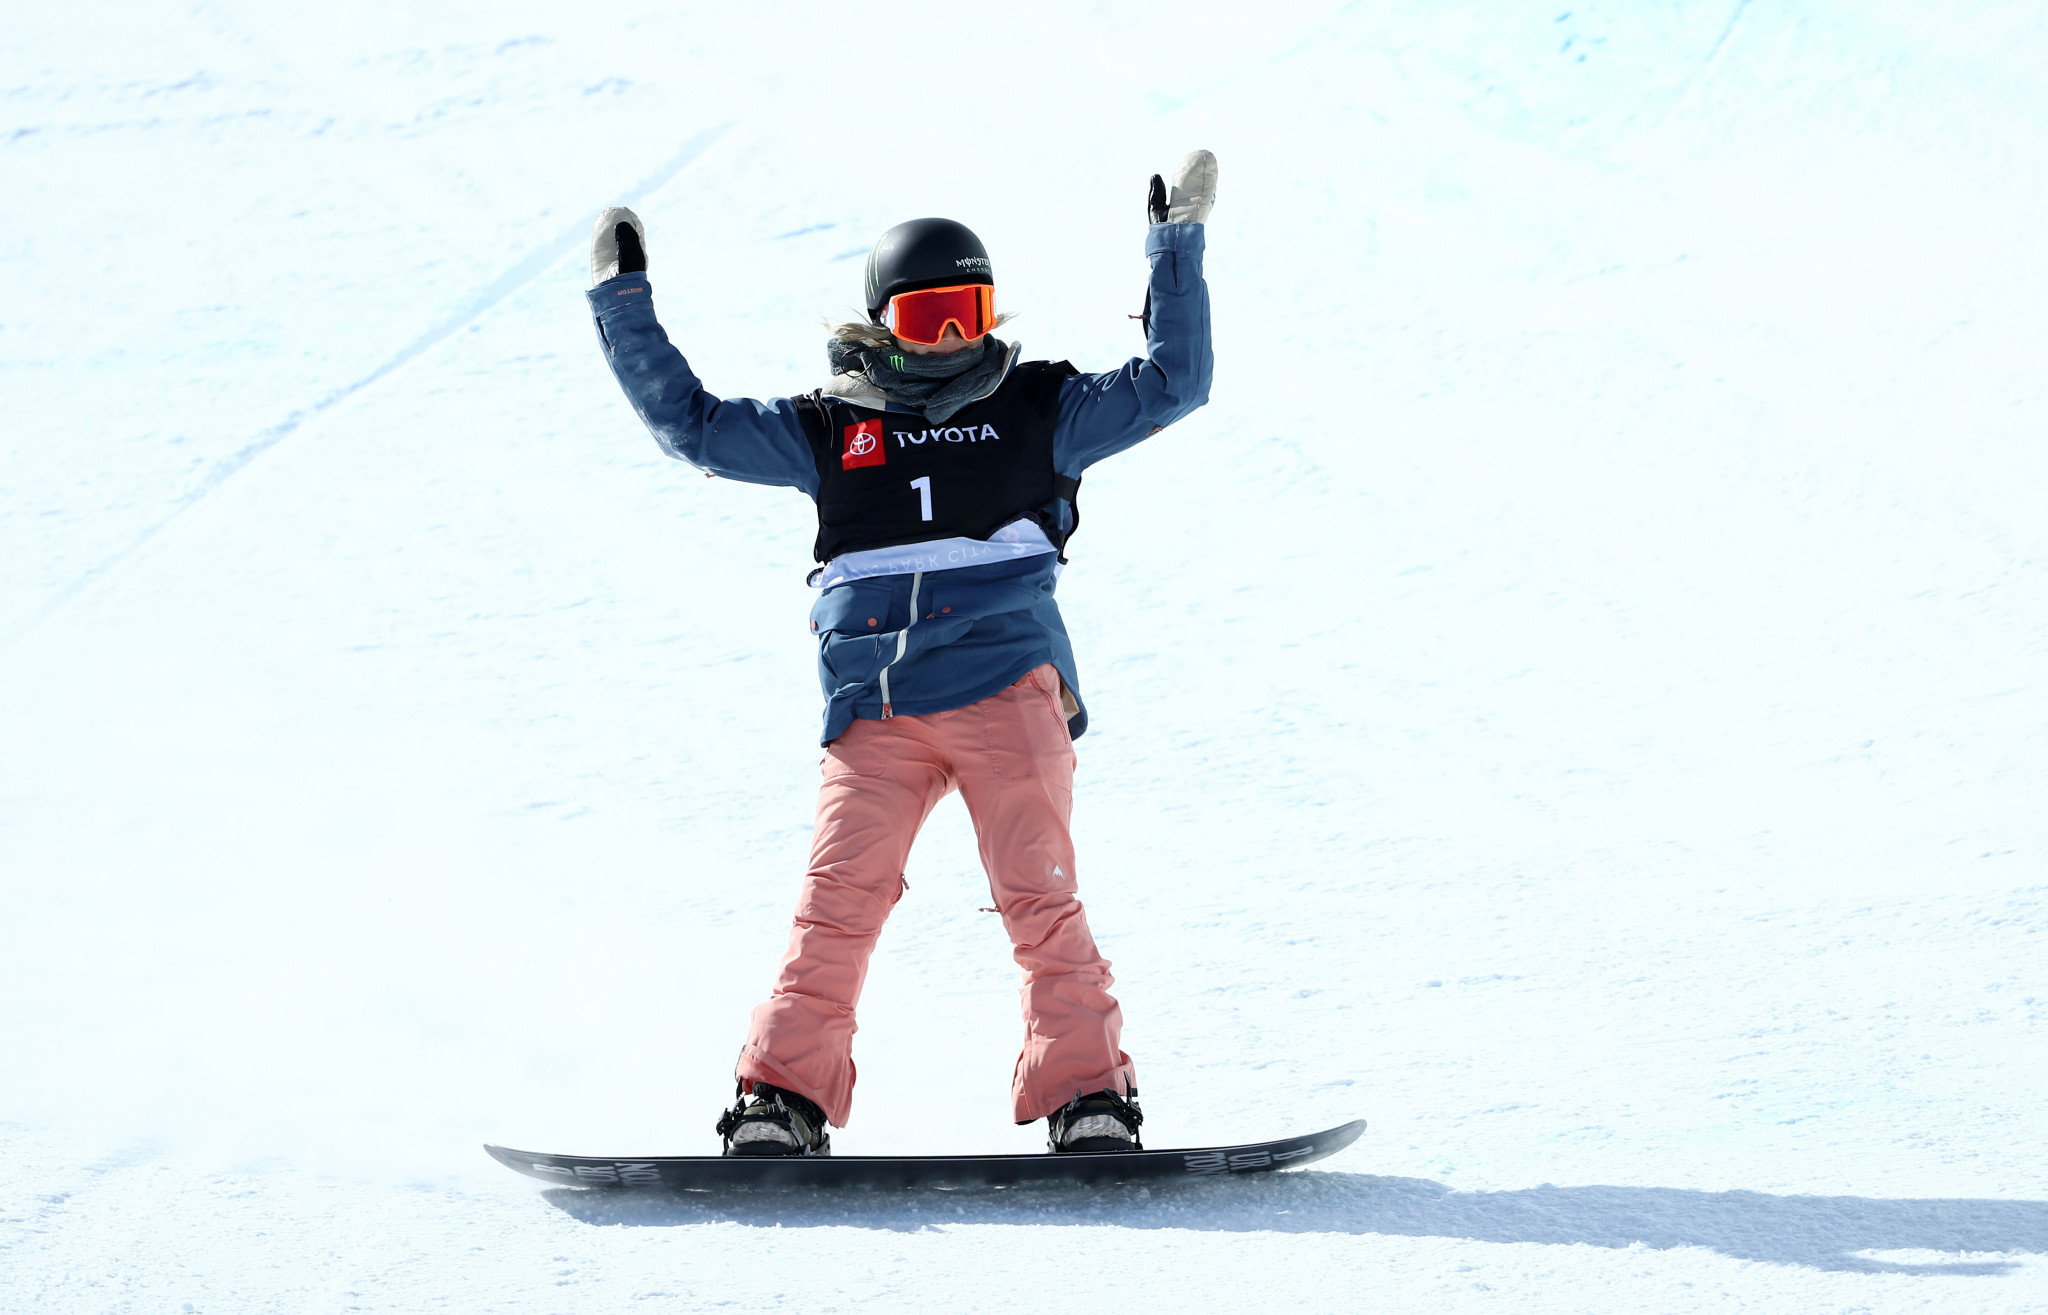 American Chloe Kim is poised to make her return to halfpipe action ©Getty Images